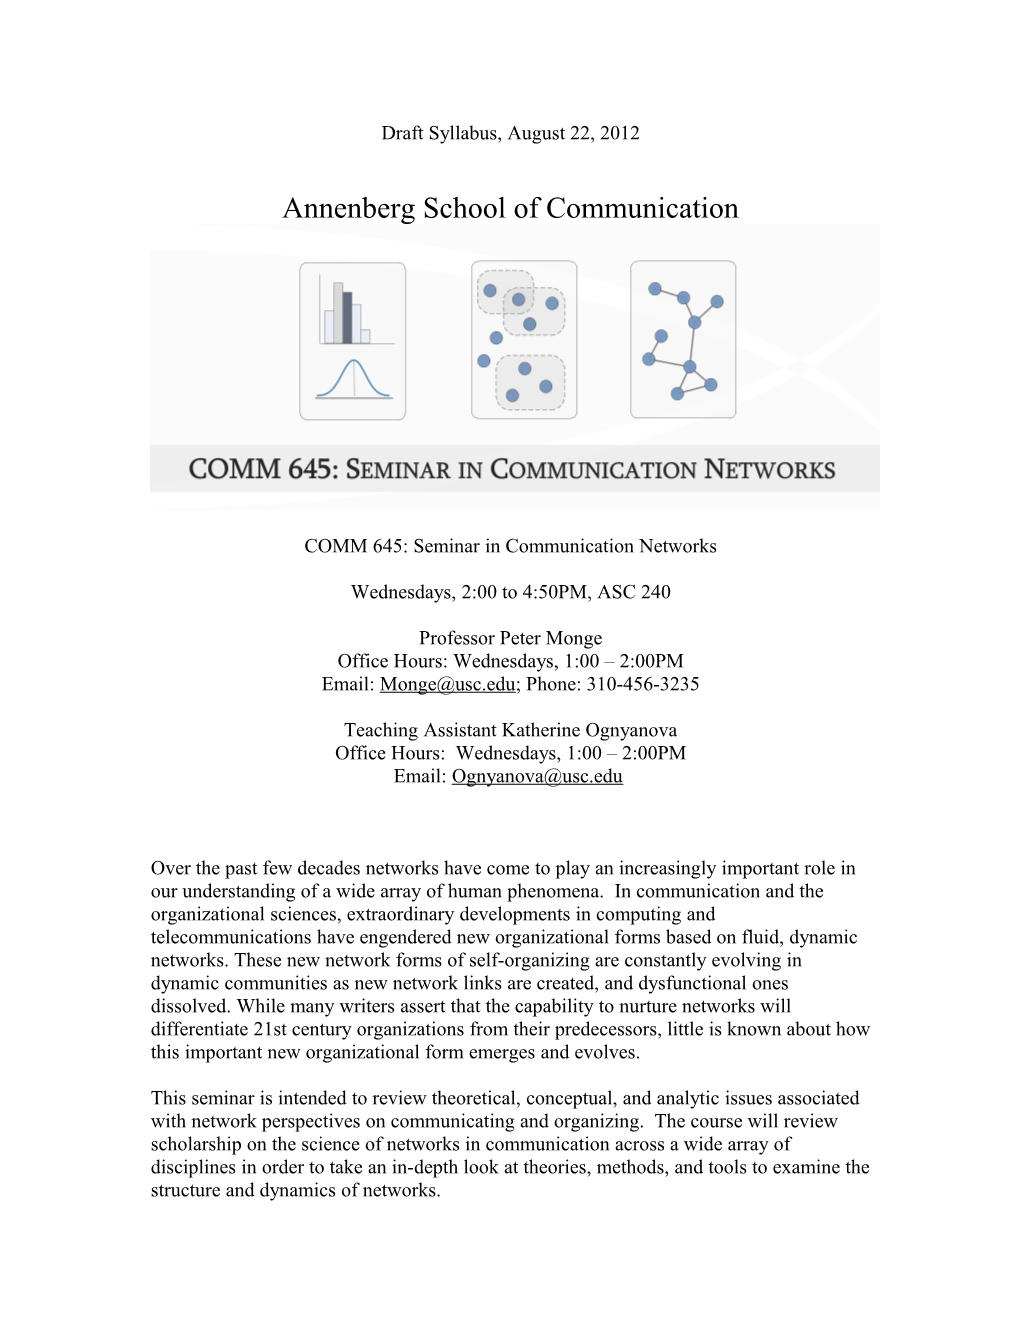 COMM 645: Seminar in Communication Networks